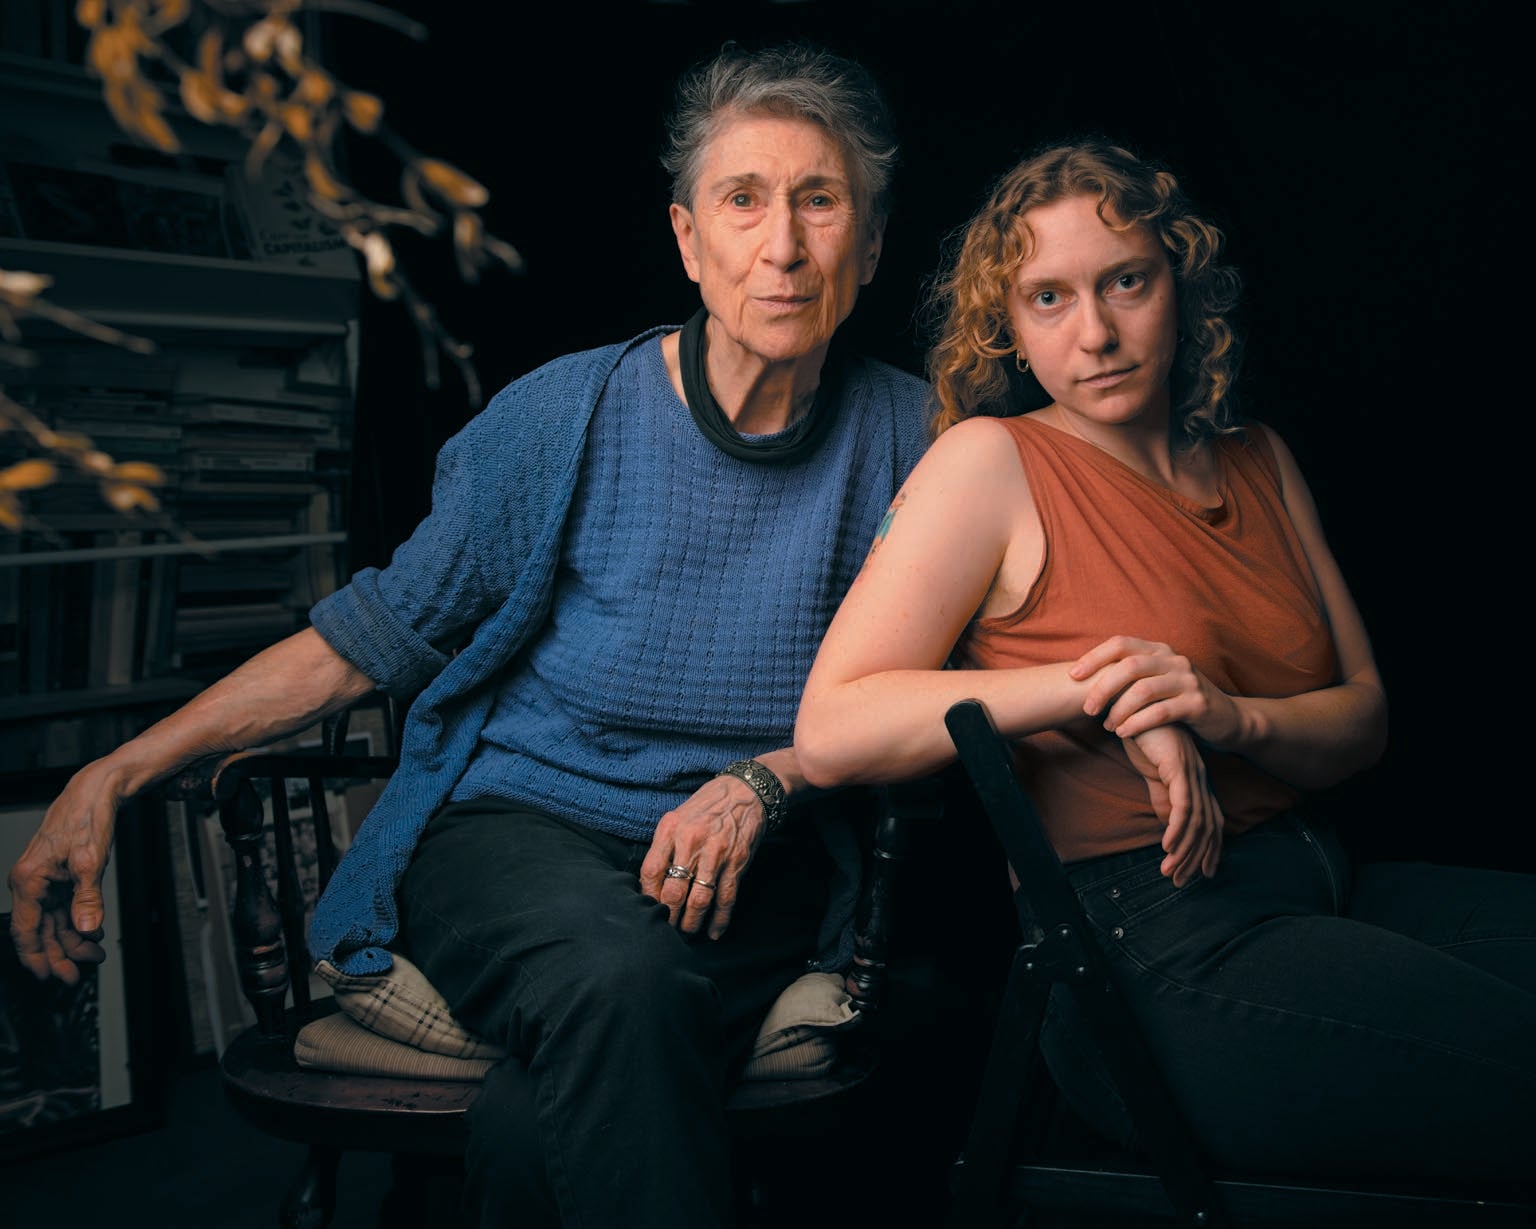 Portrait of two seated woman identified as Silvia Federici (left), Alice Markham-Cantor (right).